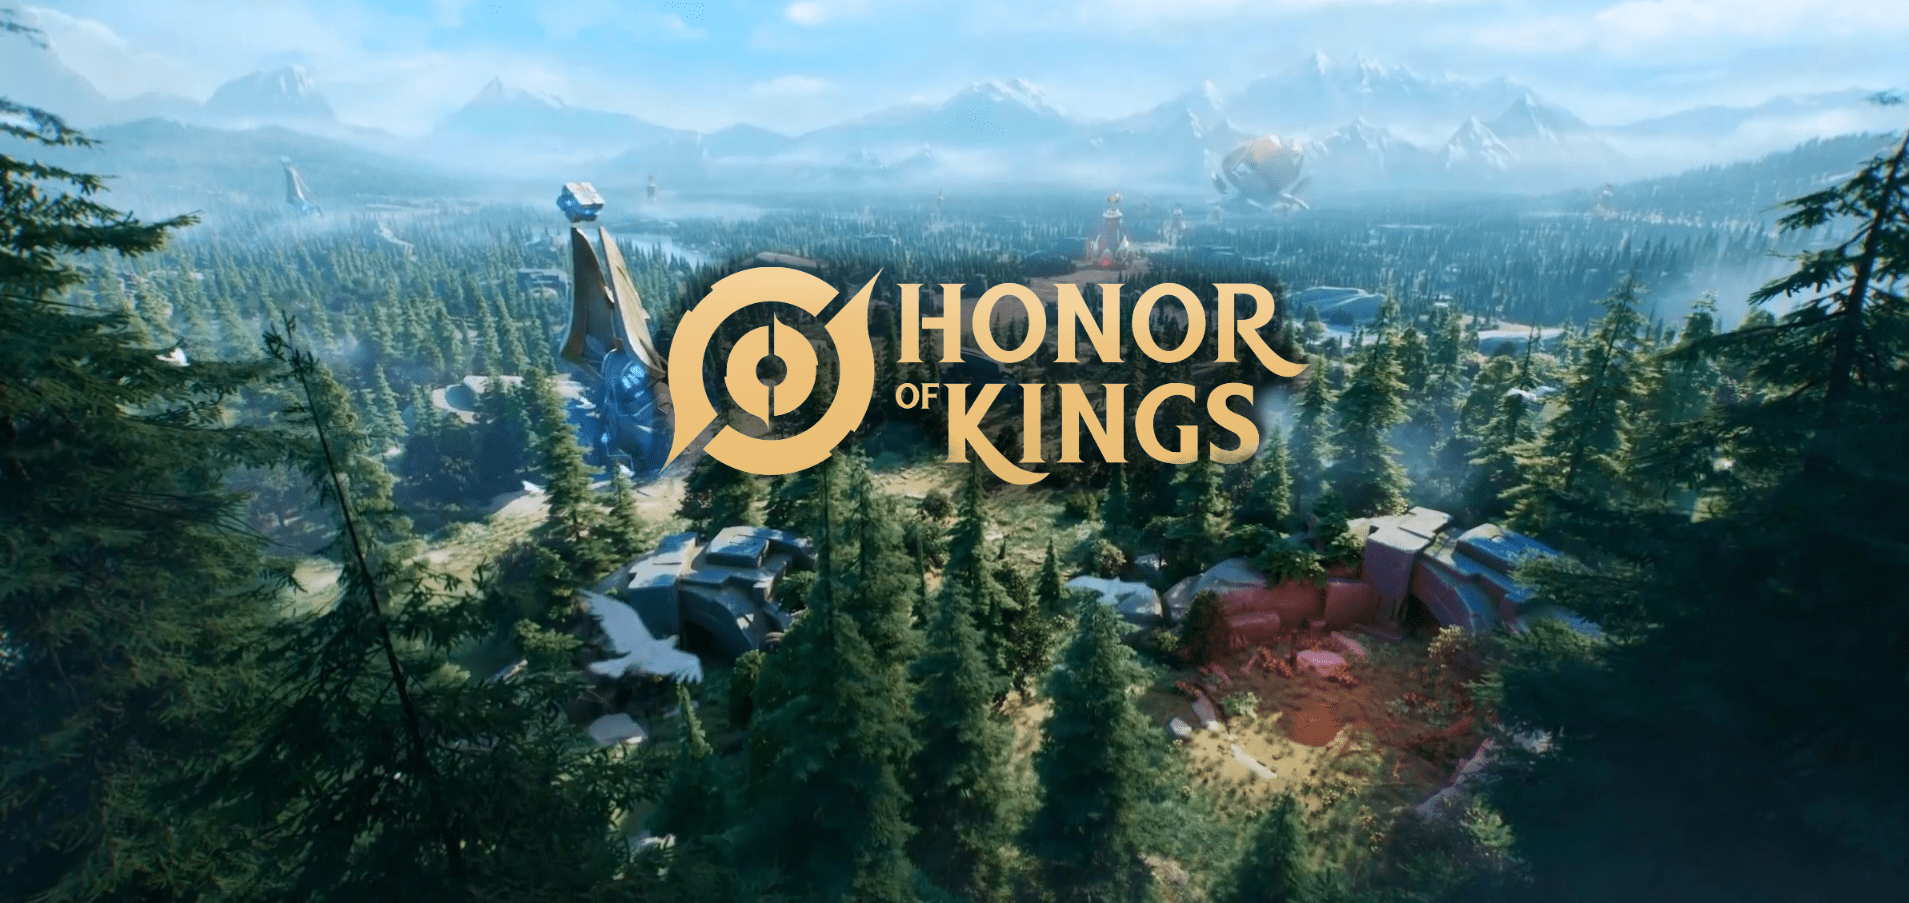 Honor of Kings – International Glorious King has been downloaded early, preparing to ‘battle’ on March 8